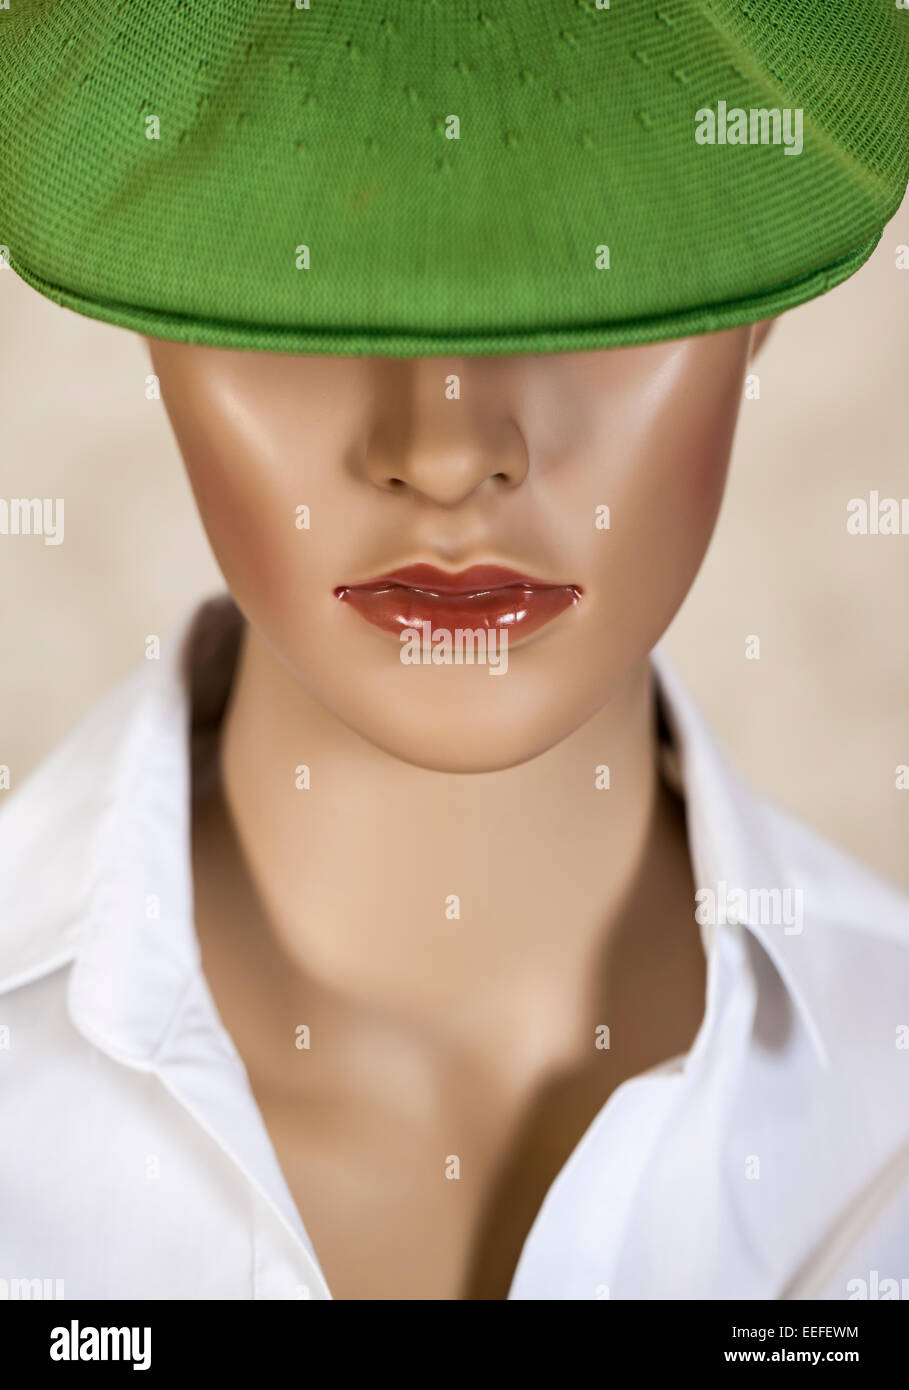 Head of a female mannequin wearing a green hat. Stock Photo